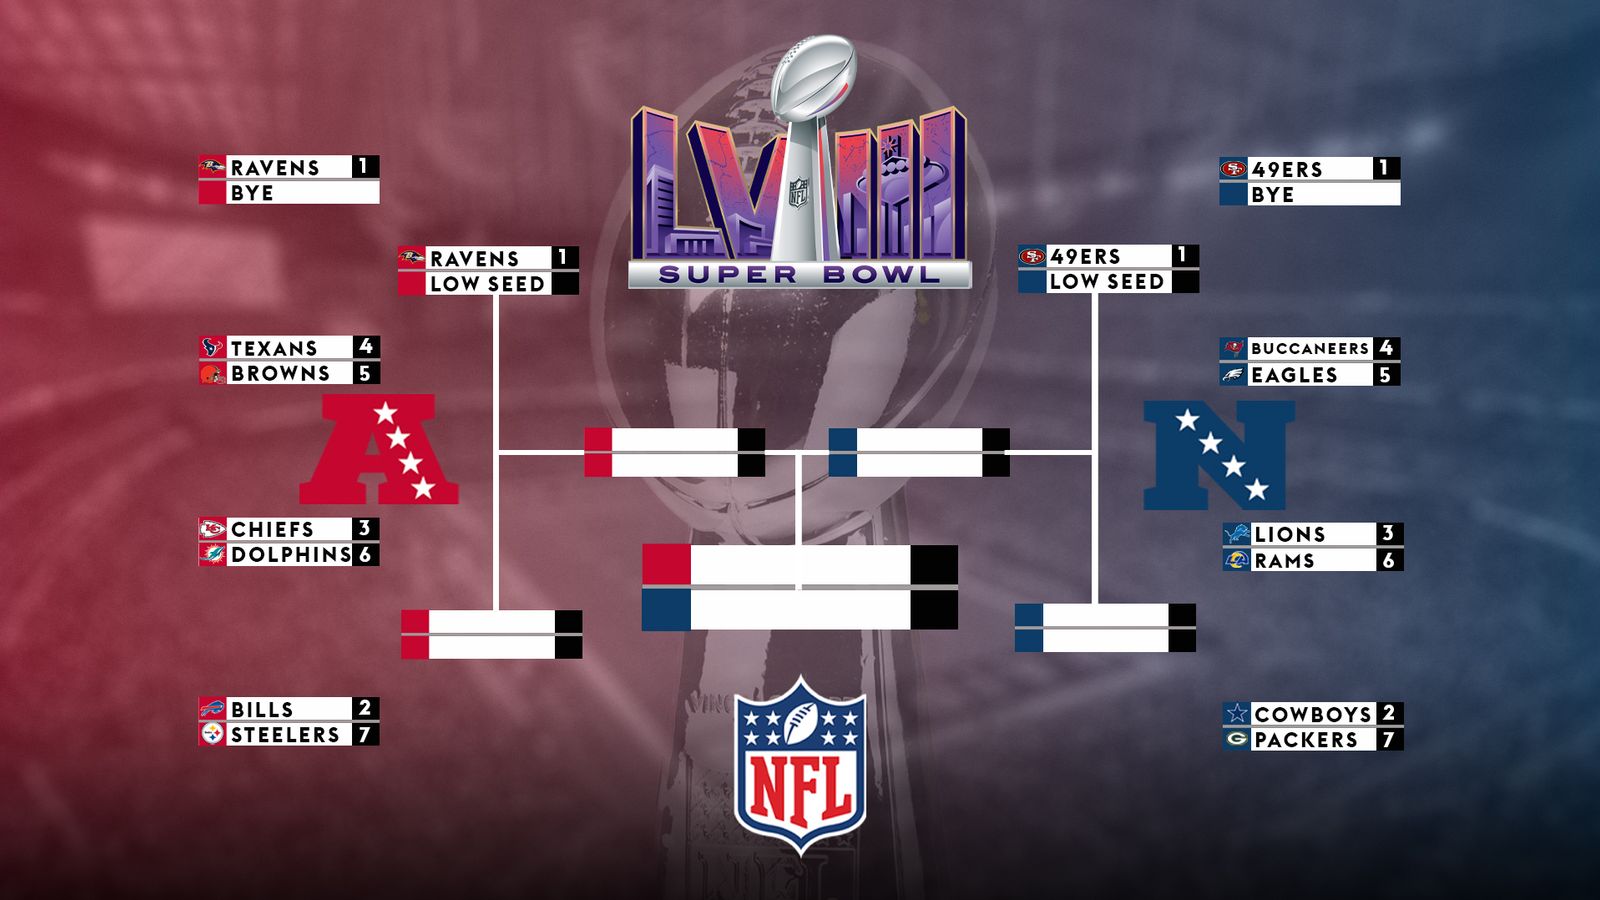 Nfl Playoff Picture Standings In Afc And Nfc Ahead Of Super Bowl Lviii In Las Vegas Nfl News